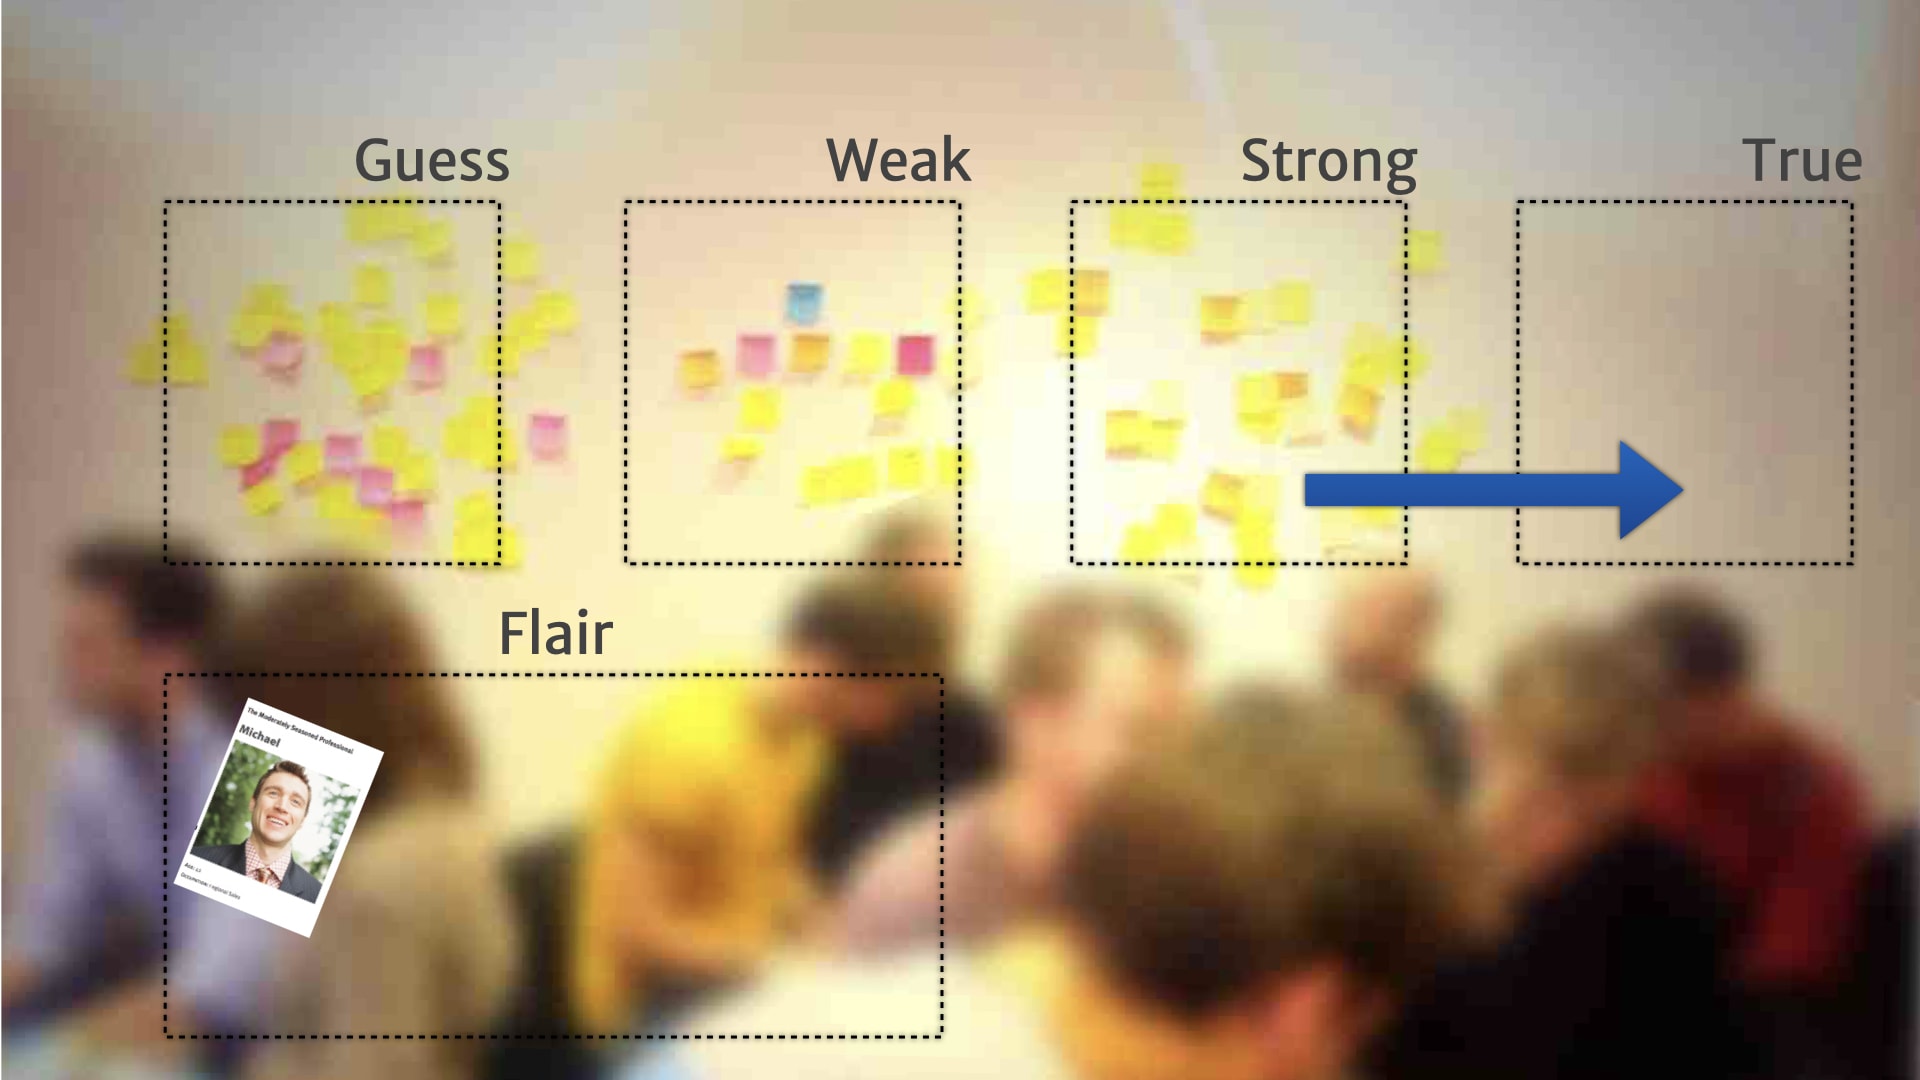 A picture of a wall of post-it notes divided into four categories running left to right (Guess, Weak, Strong, and True). One long blue arrow illustrate a rare transition between the sections.